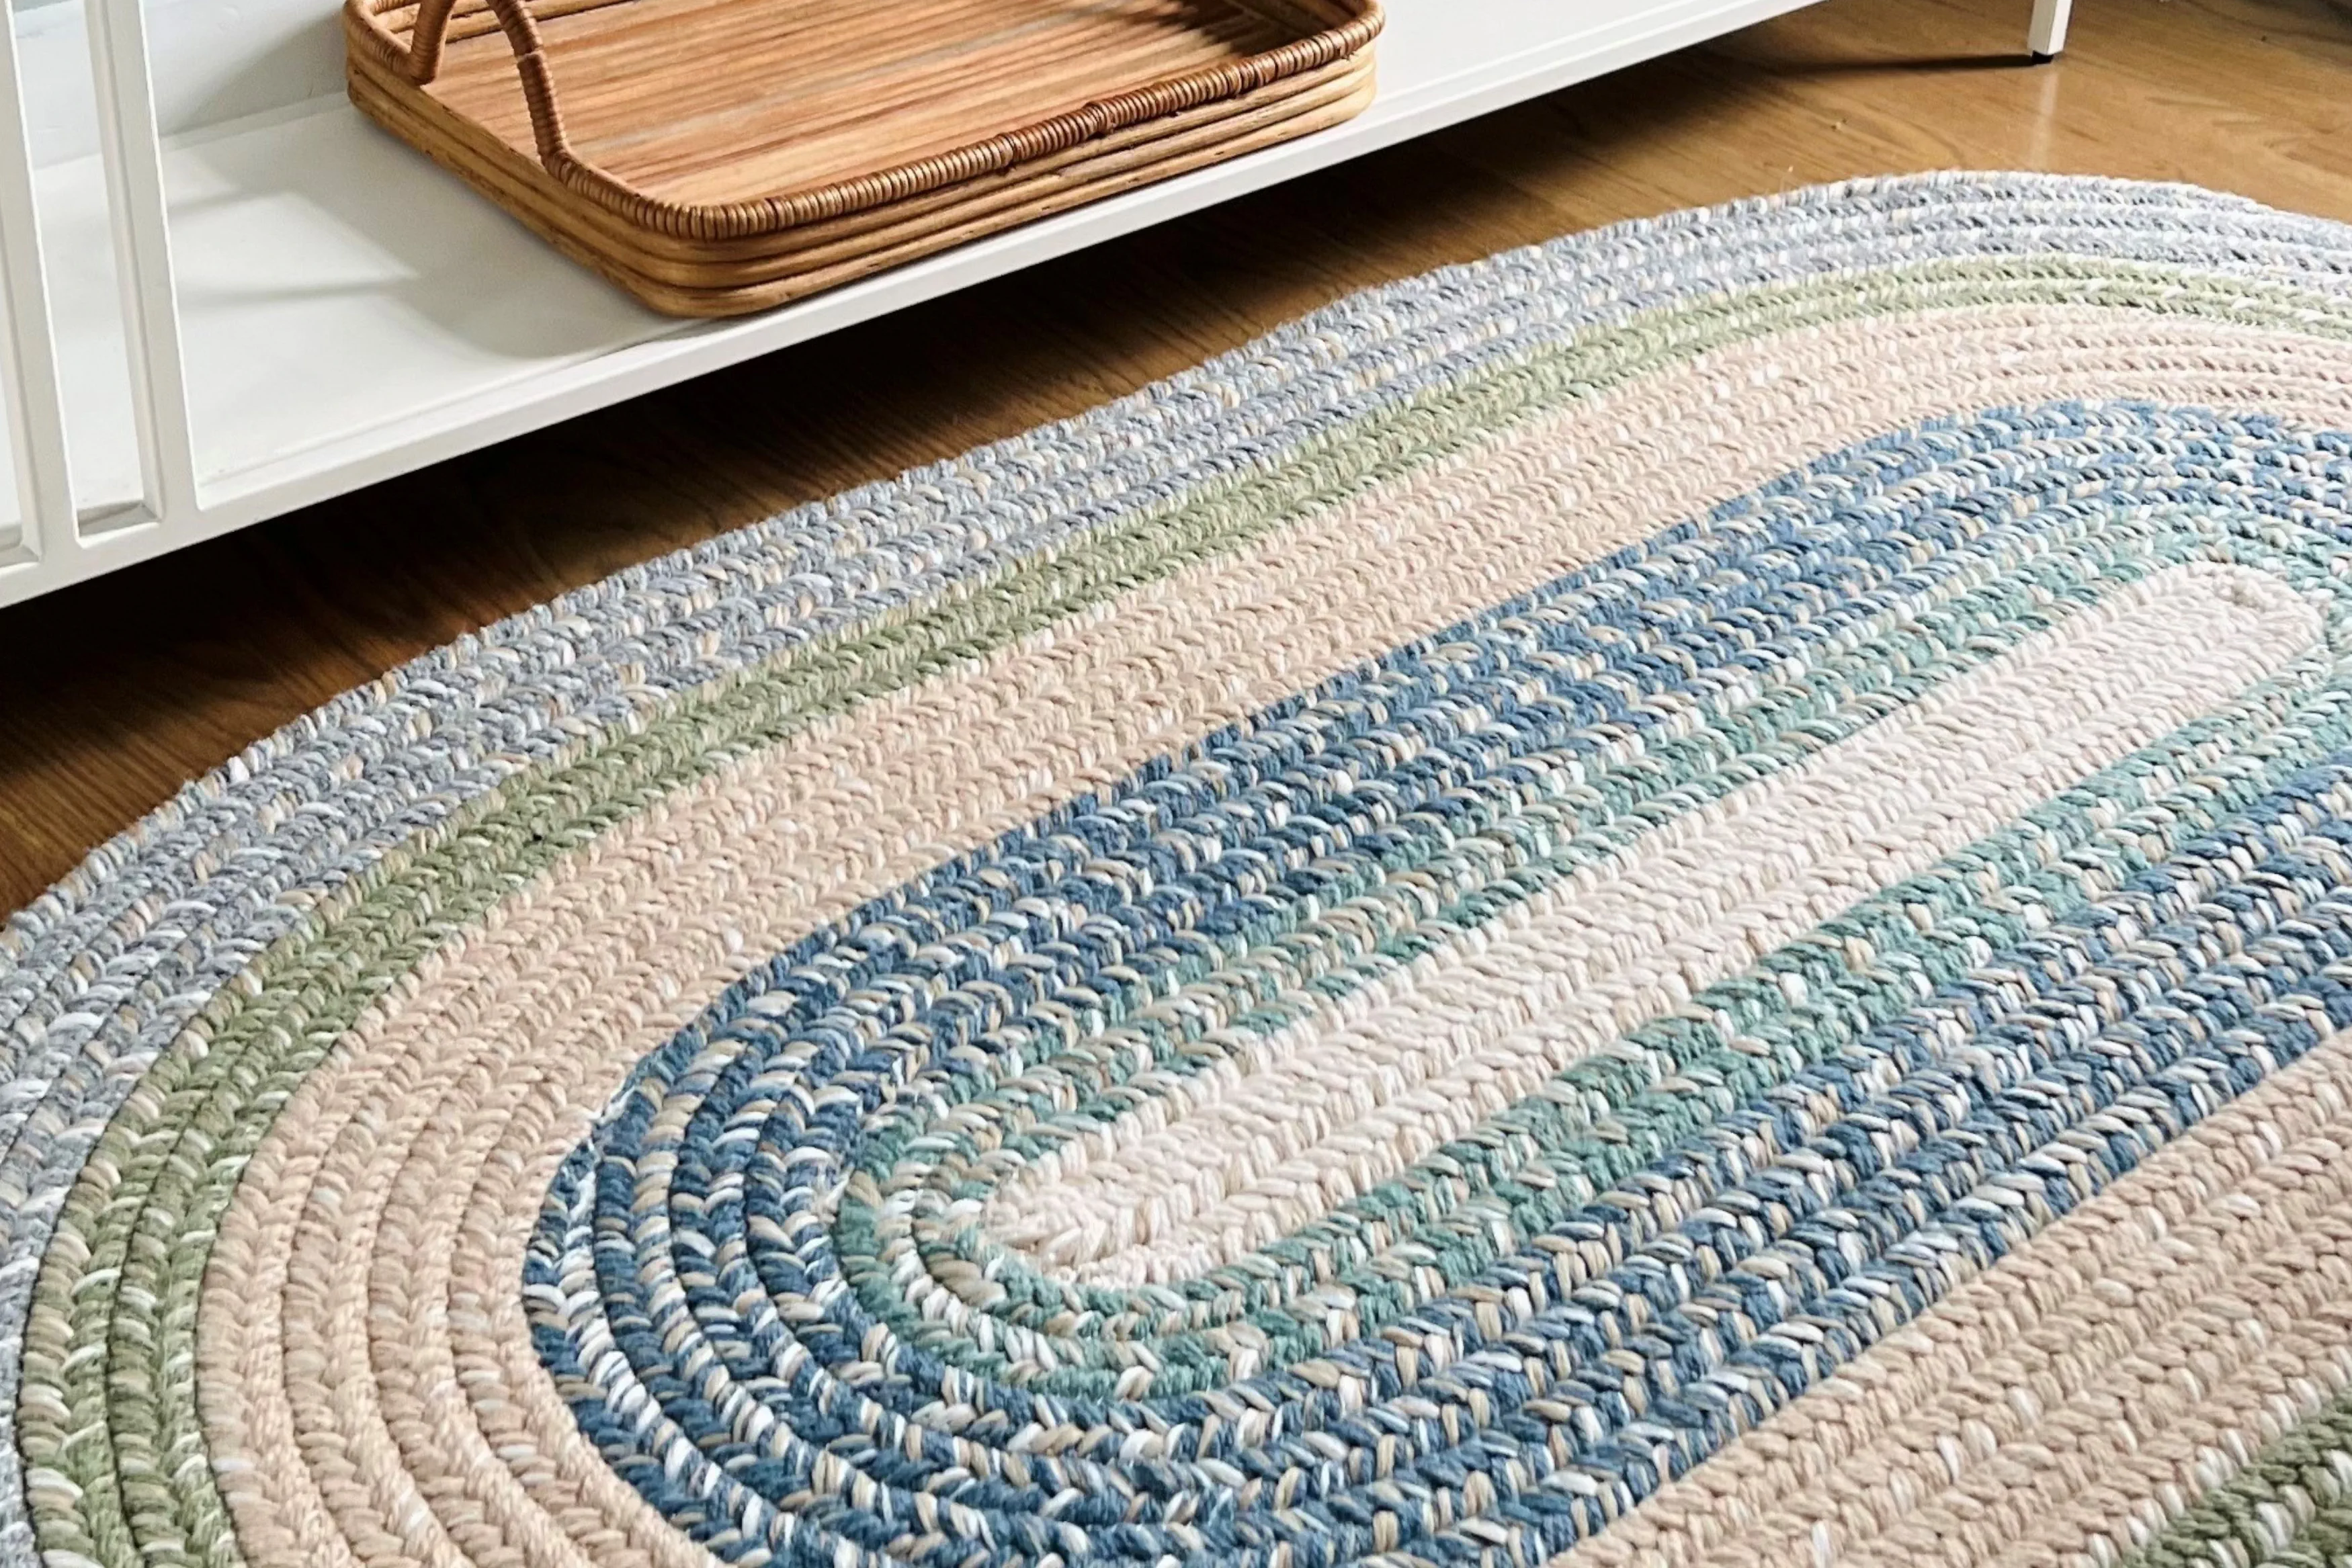 USA Made Braided Rugs, Baskets and Décor